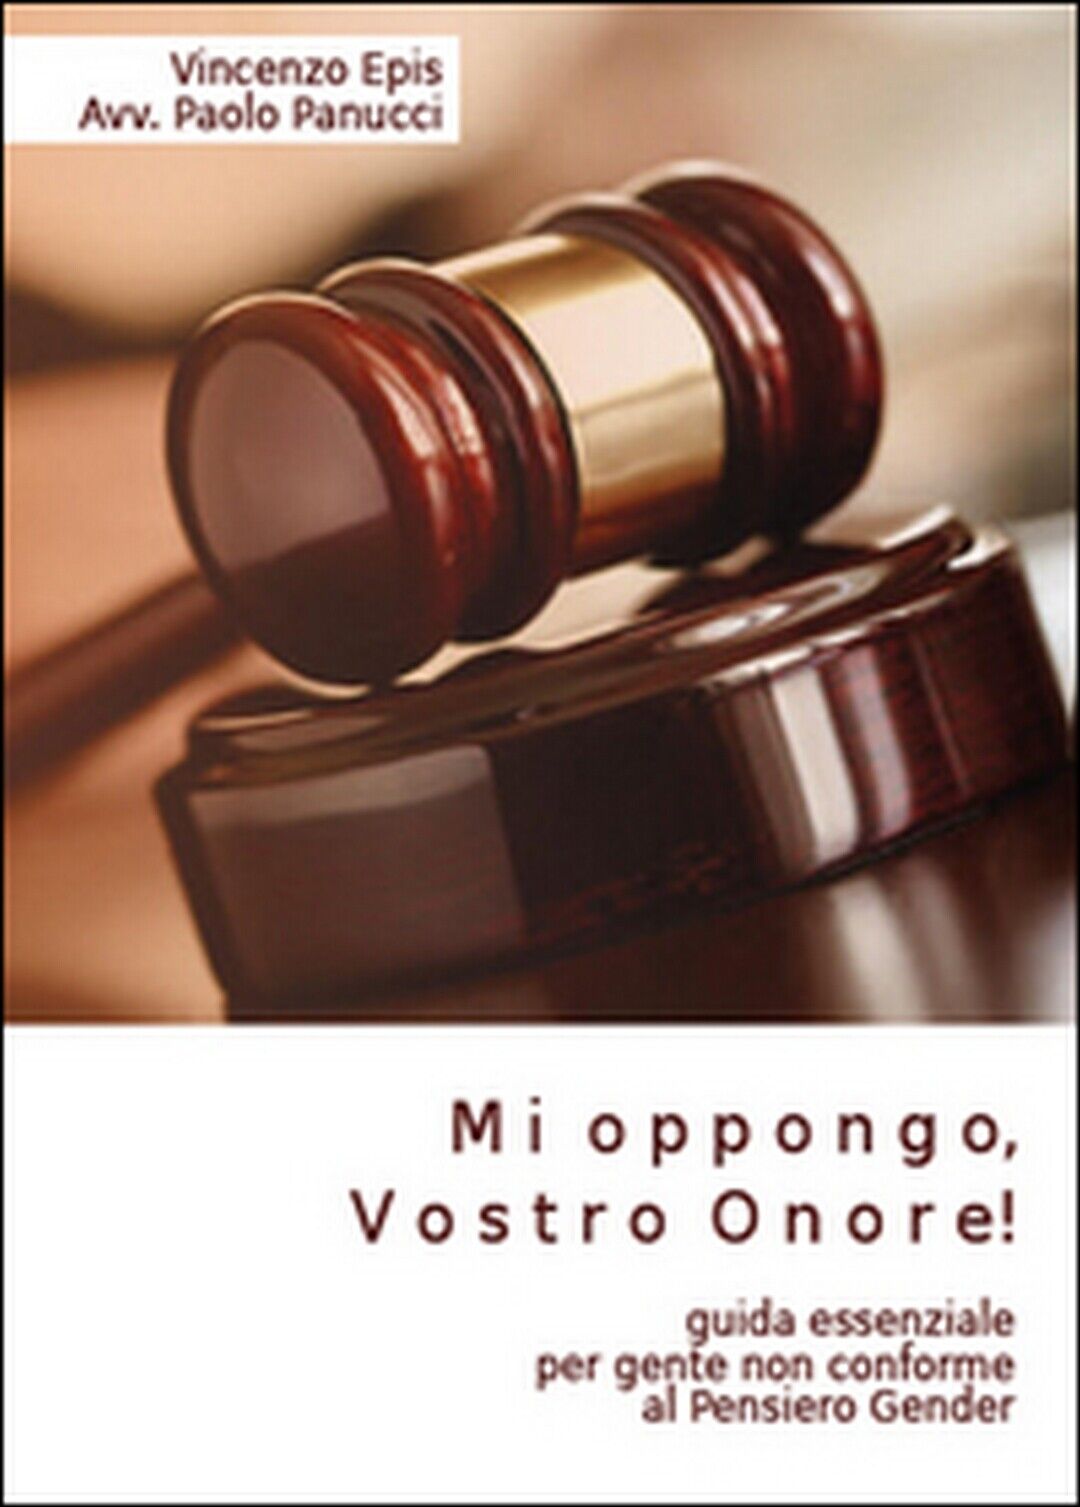 Mi oppongo, vostro onore!  - Paolo Panucci, Vincenzo Epis,  2015,  Youcanprint